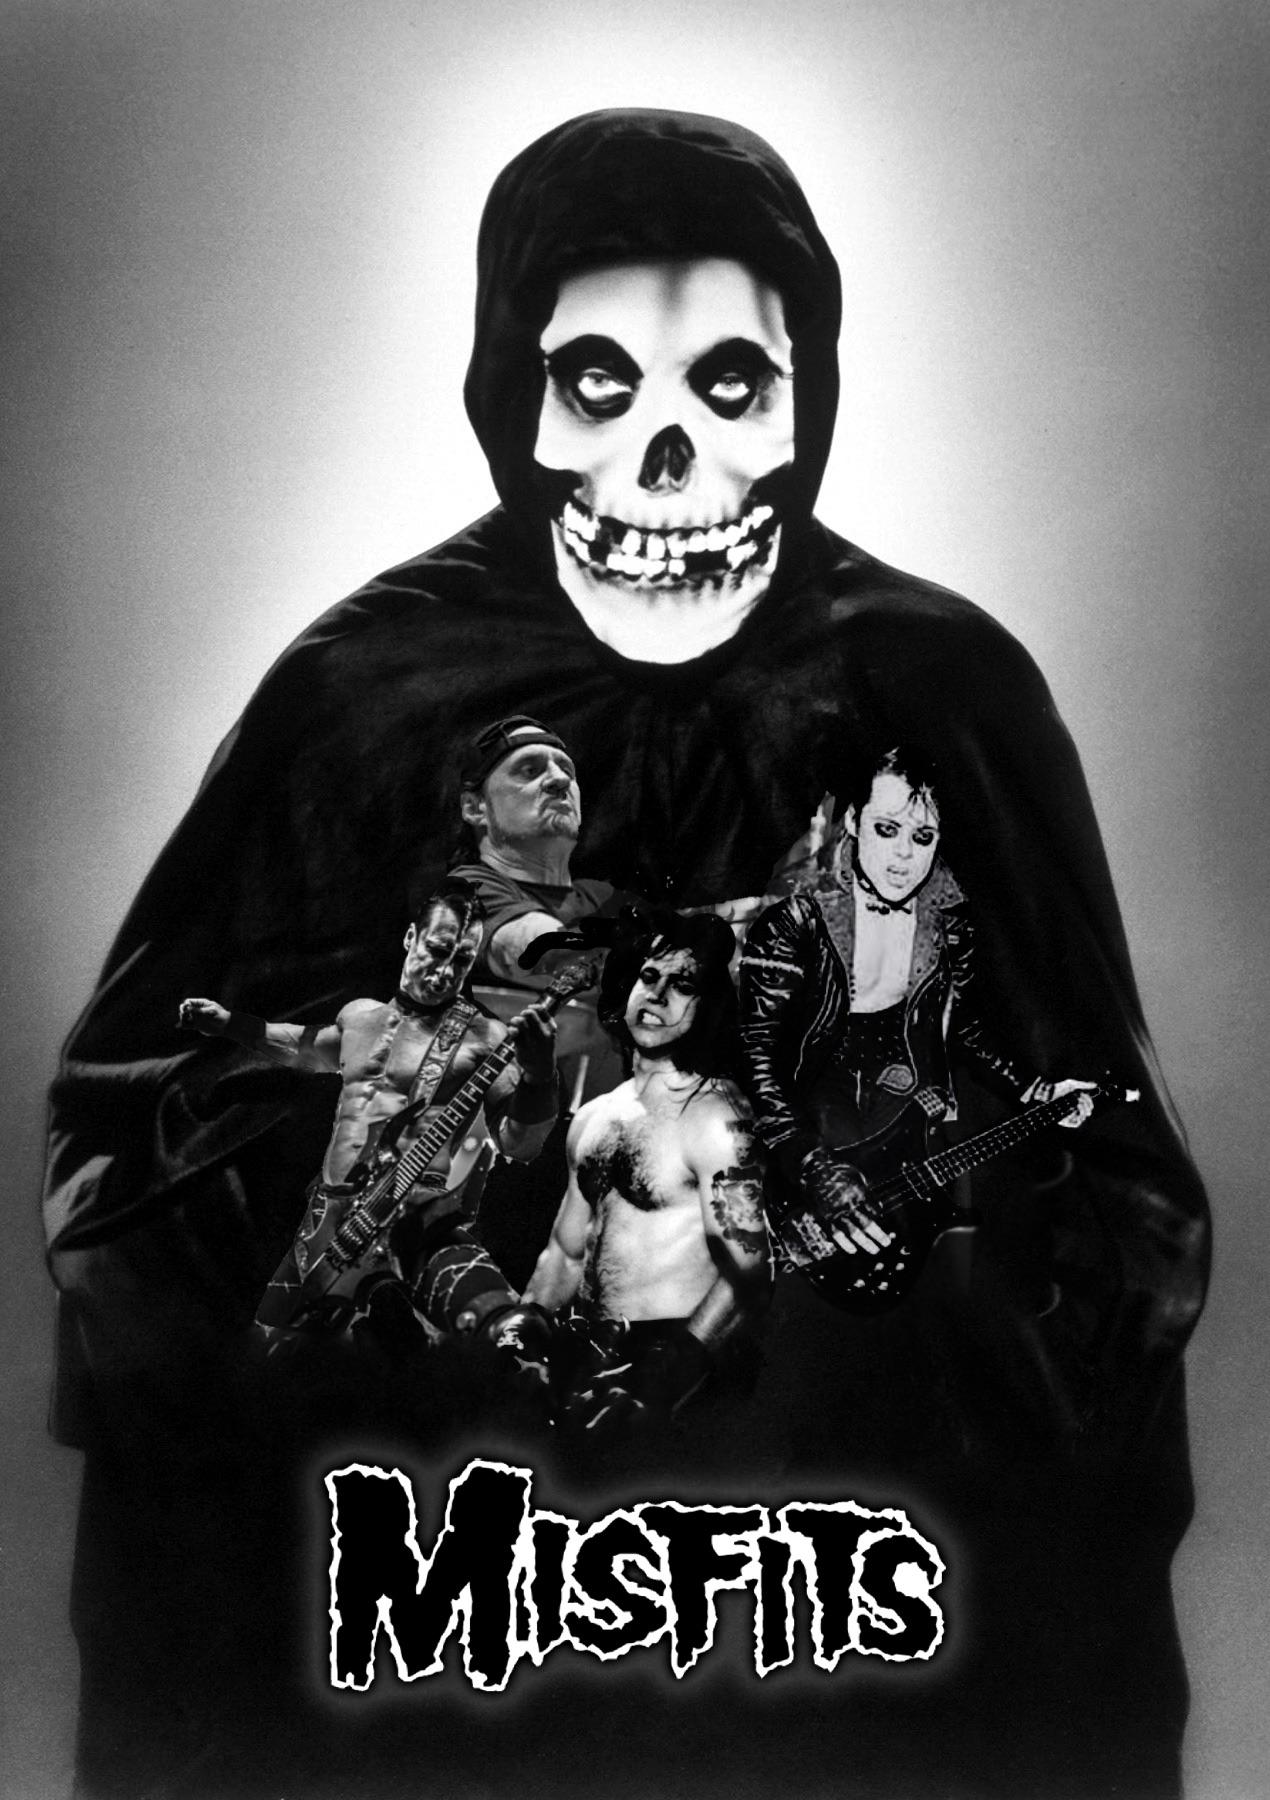 Misfits wallpaper i made in photoshop after a found a lower quality old version rphonewallpapers